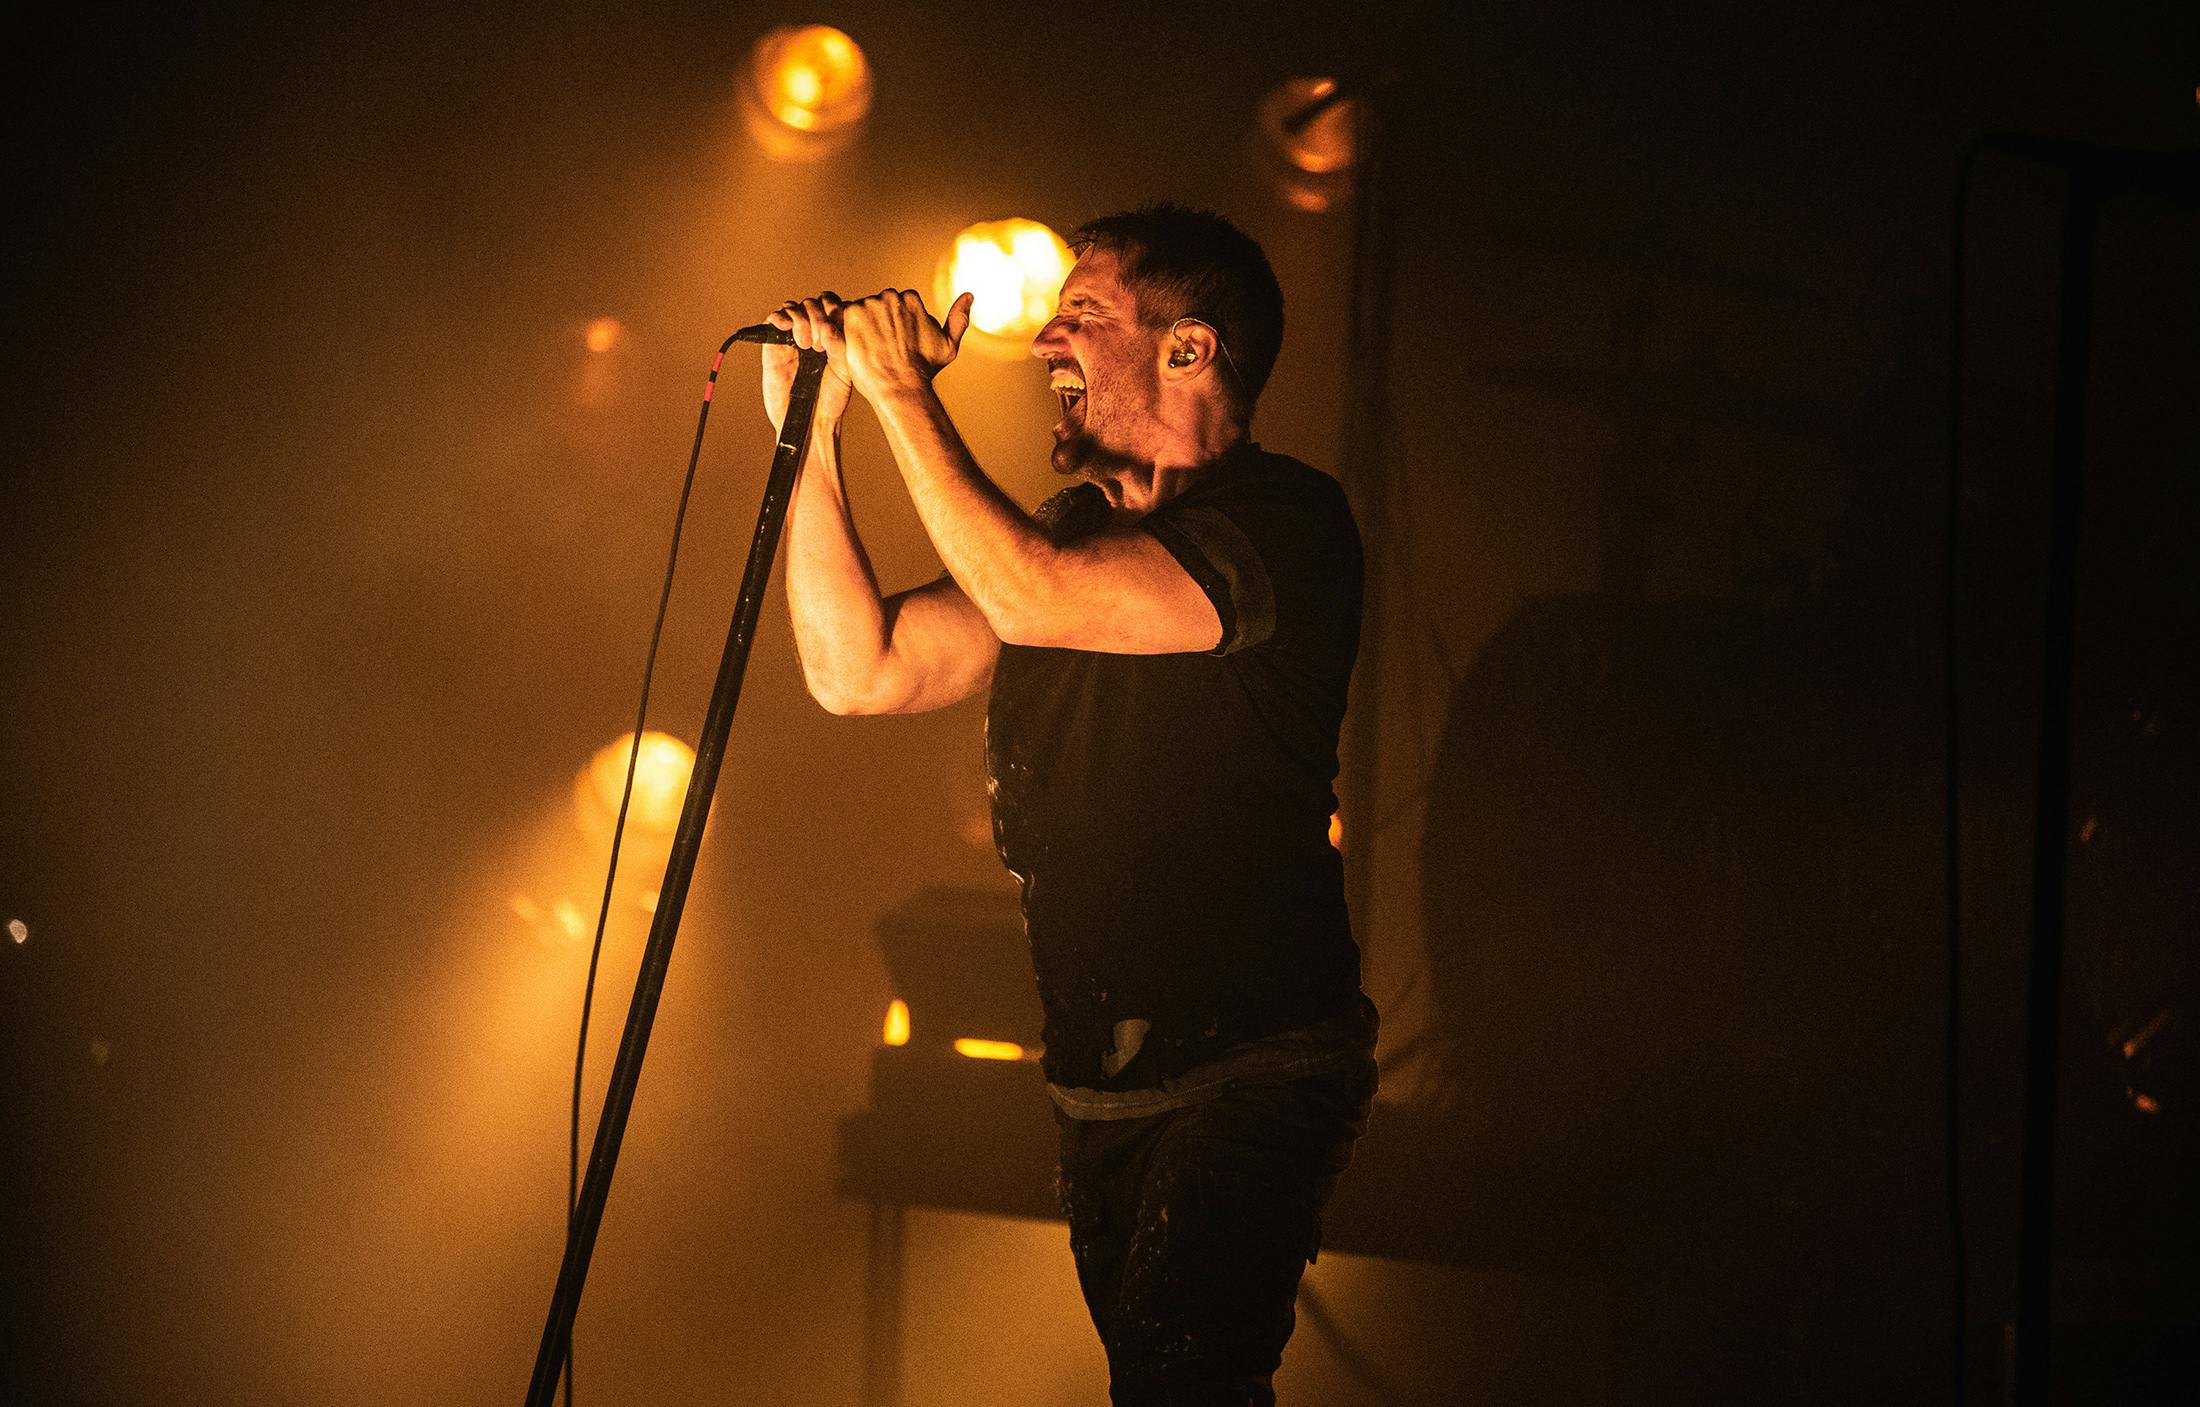 Nine Inch Nails have announced their first live shows since 2018